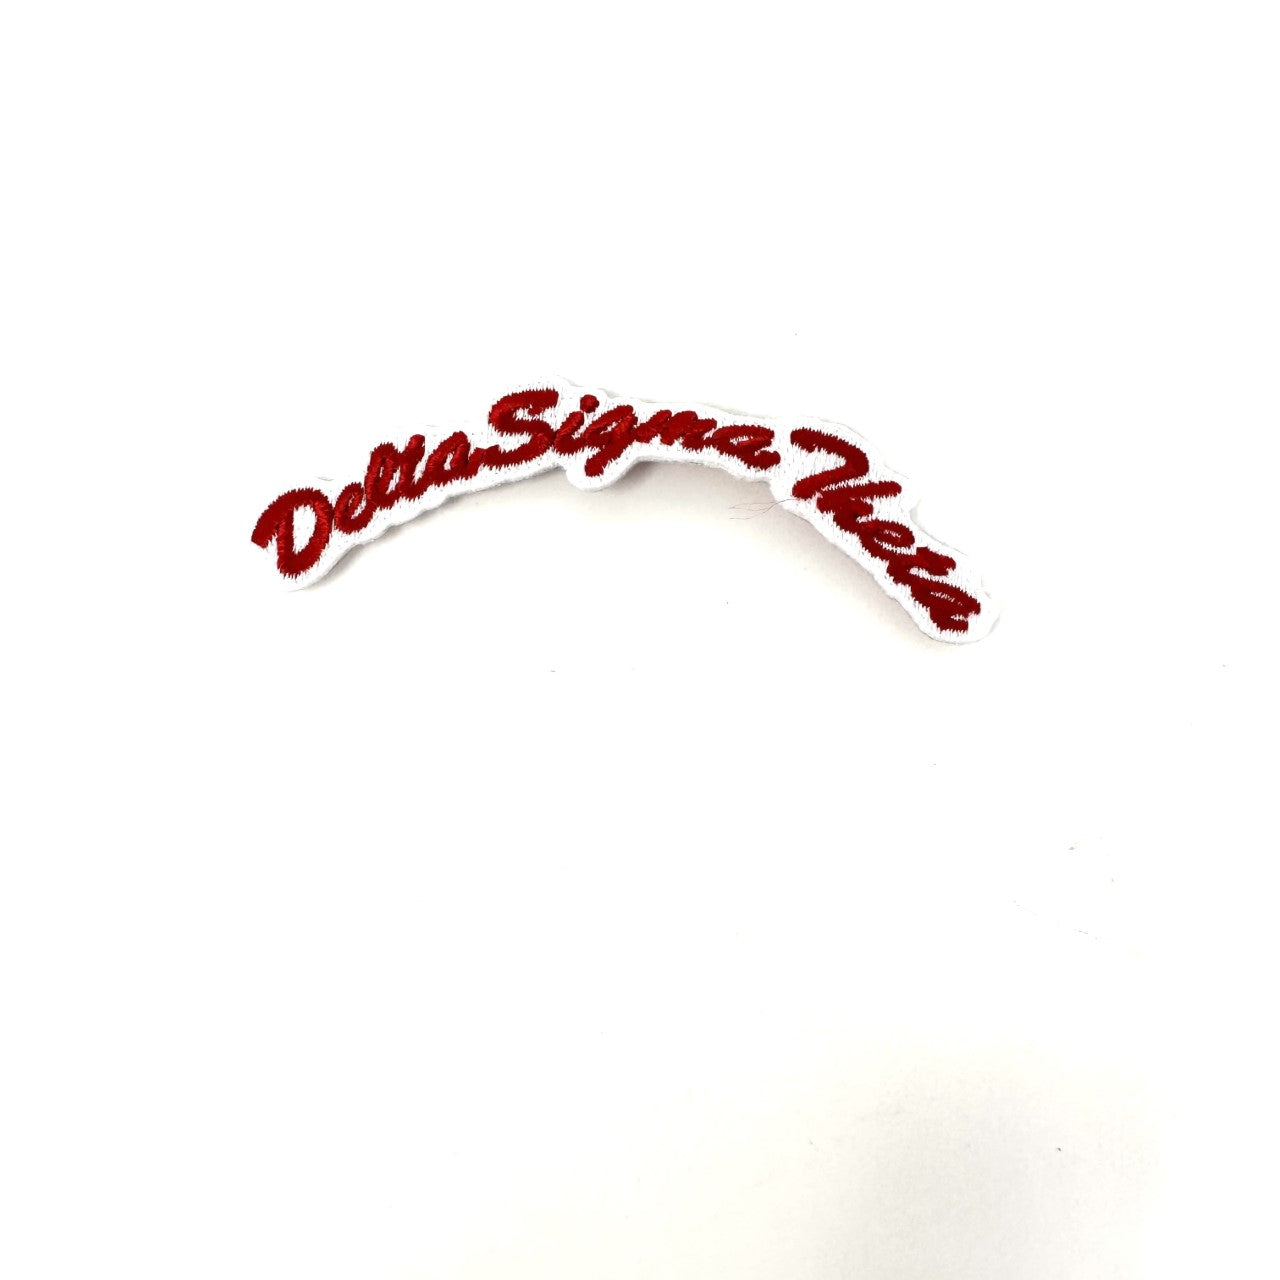 DST 2 Inch Small Curved Delta Sigma Theta Patch